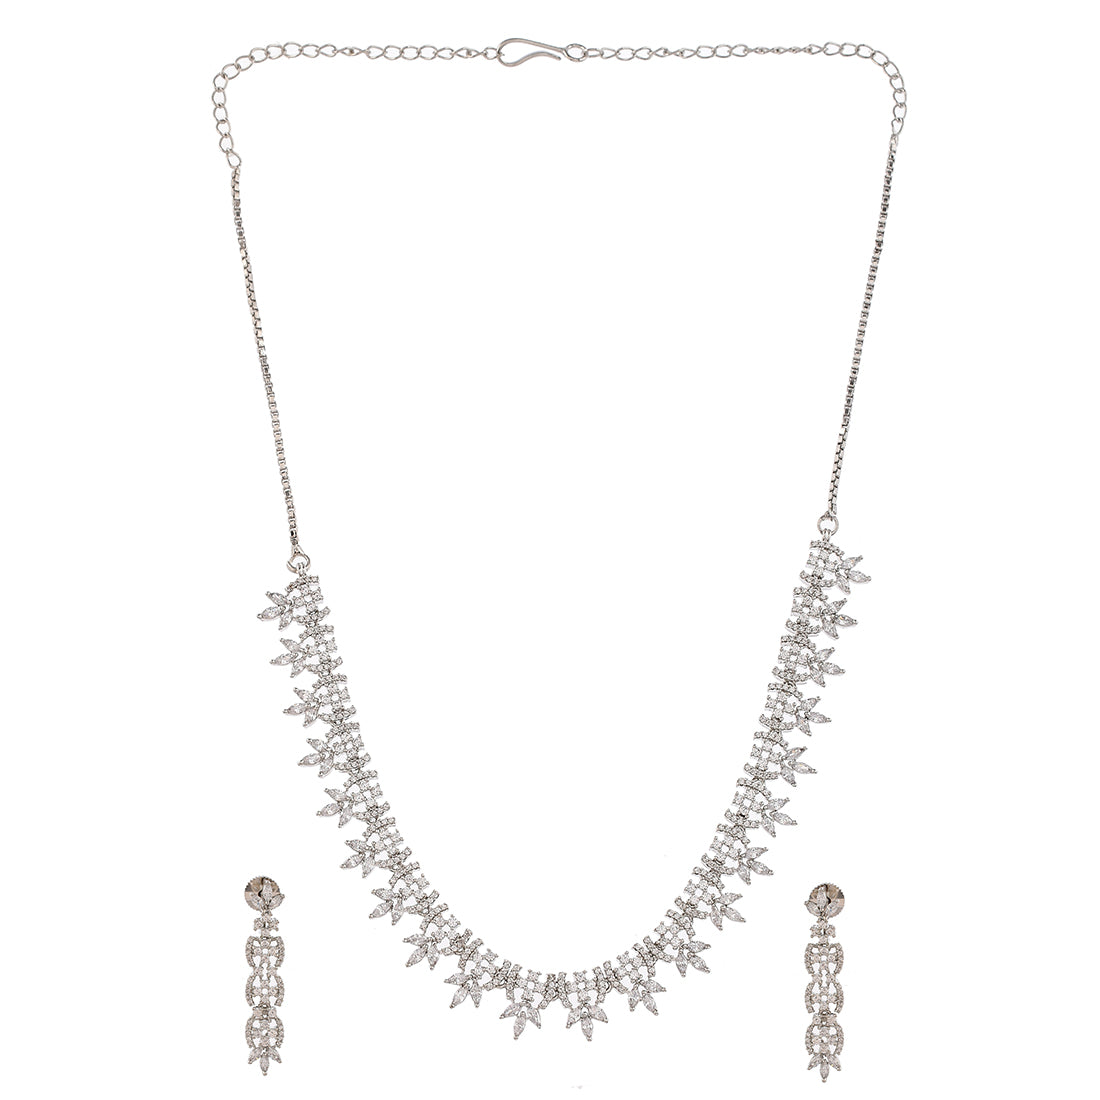 Cz Elegance Silver Plated Brass Made Leafy Necklace And Earrings